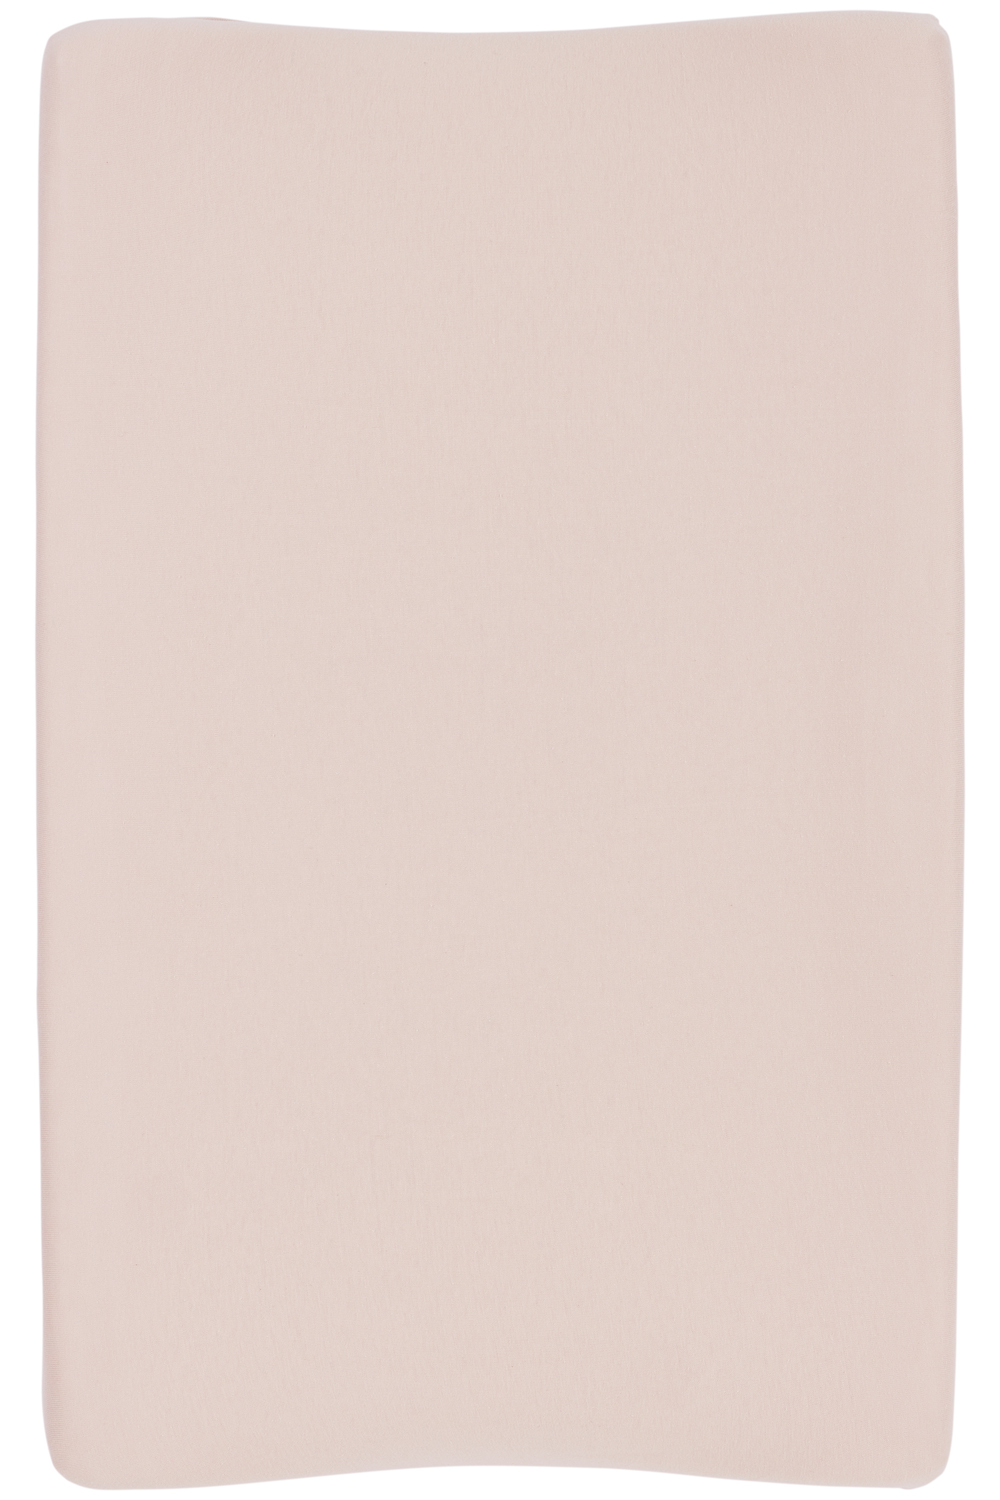 Changing mat cover 2-pack Uni - soft pink - 50x70cm